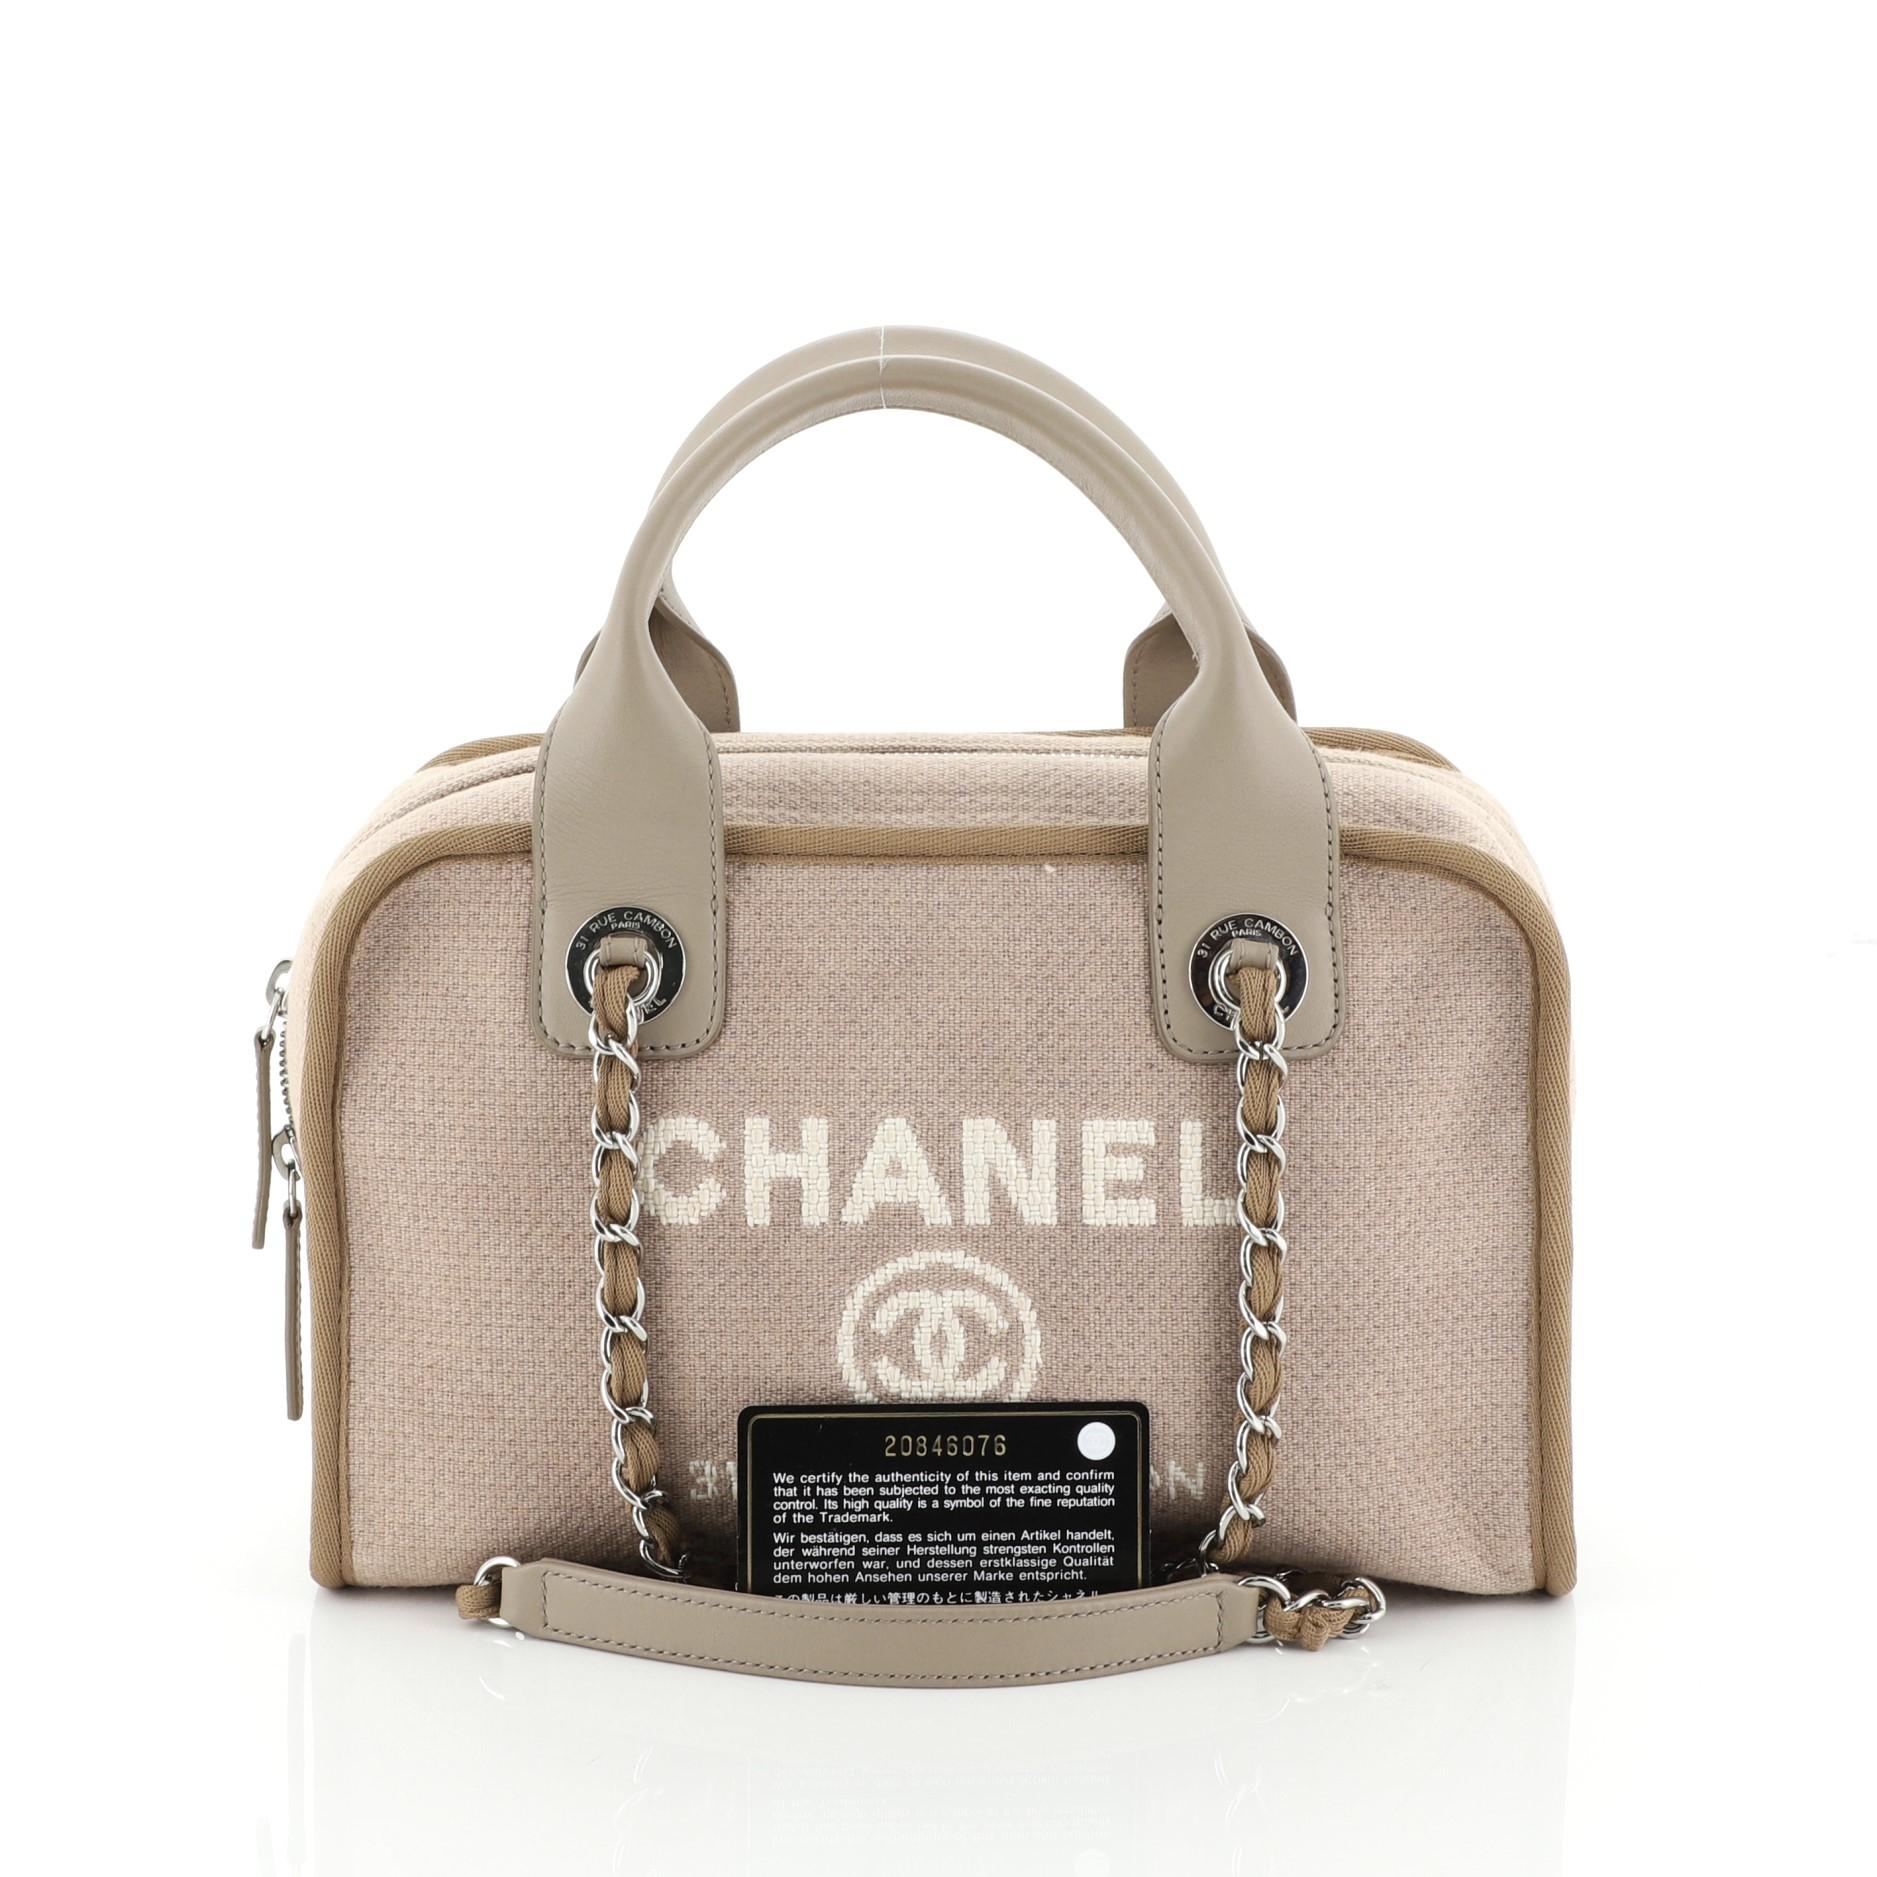 This Chanel Deauville Bowling Bag Canvas Small, crafted in neutral canvas, features dual rolled leather top handles, dual woven-in chain straps with leather pads, Chanel logo and Parisian store address on front, and silver-tone hardware. Its zip